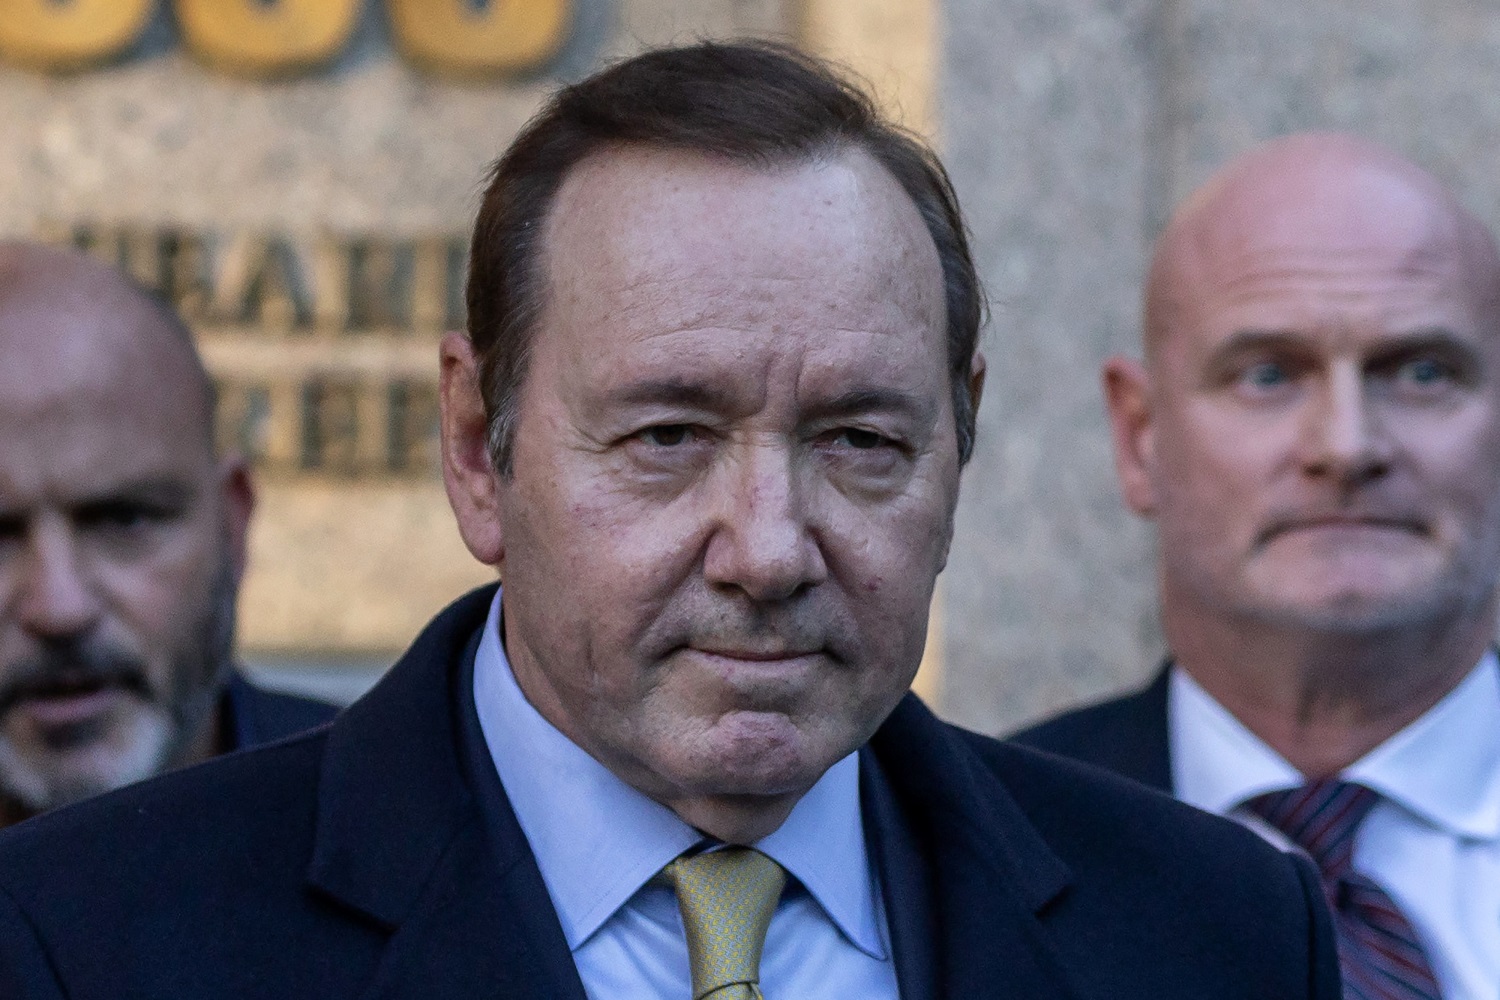 Kevin Spacey accepts Italian award